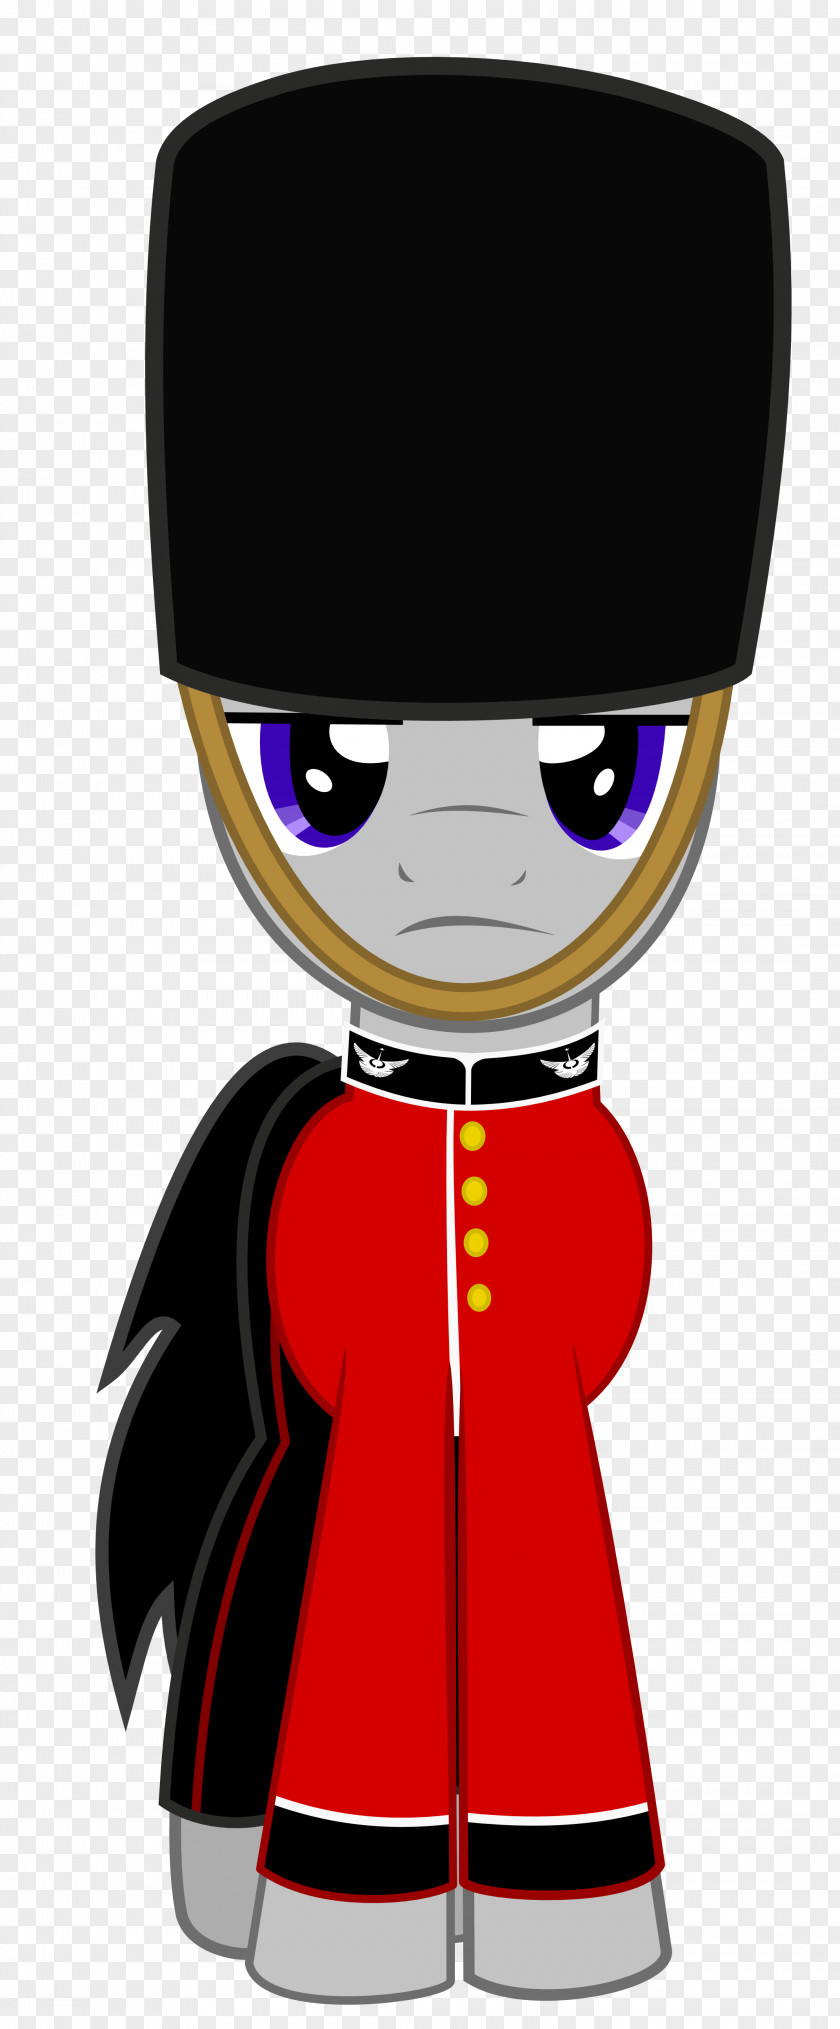 London Guard Product Design Illustration Character PNG